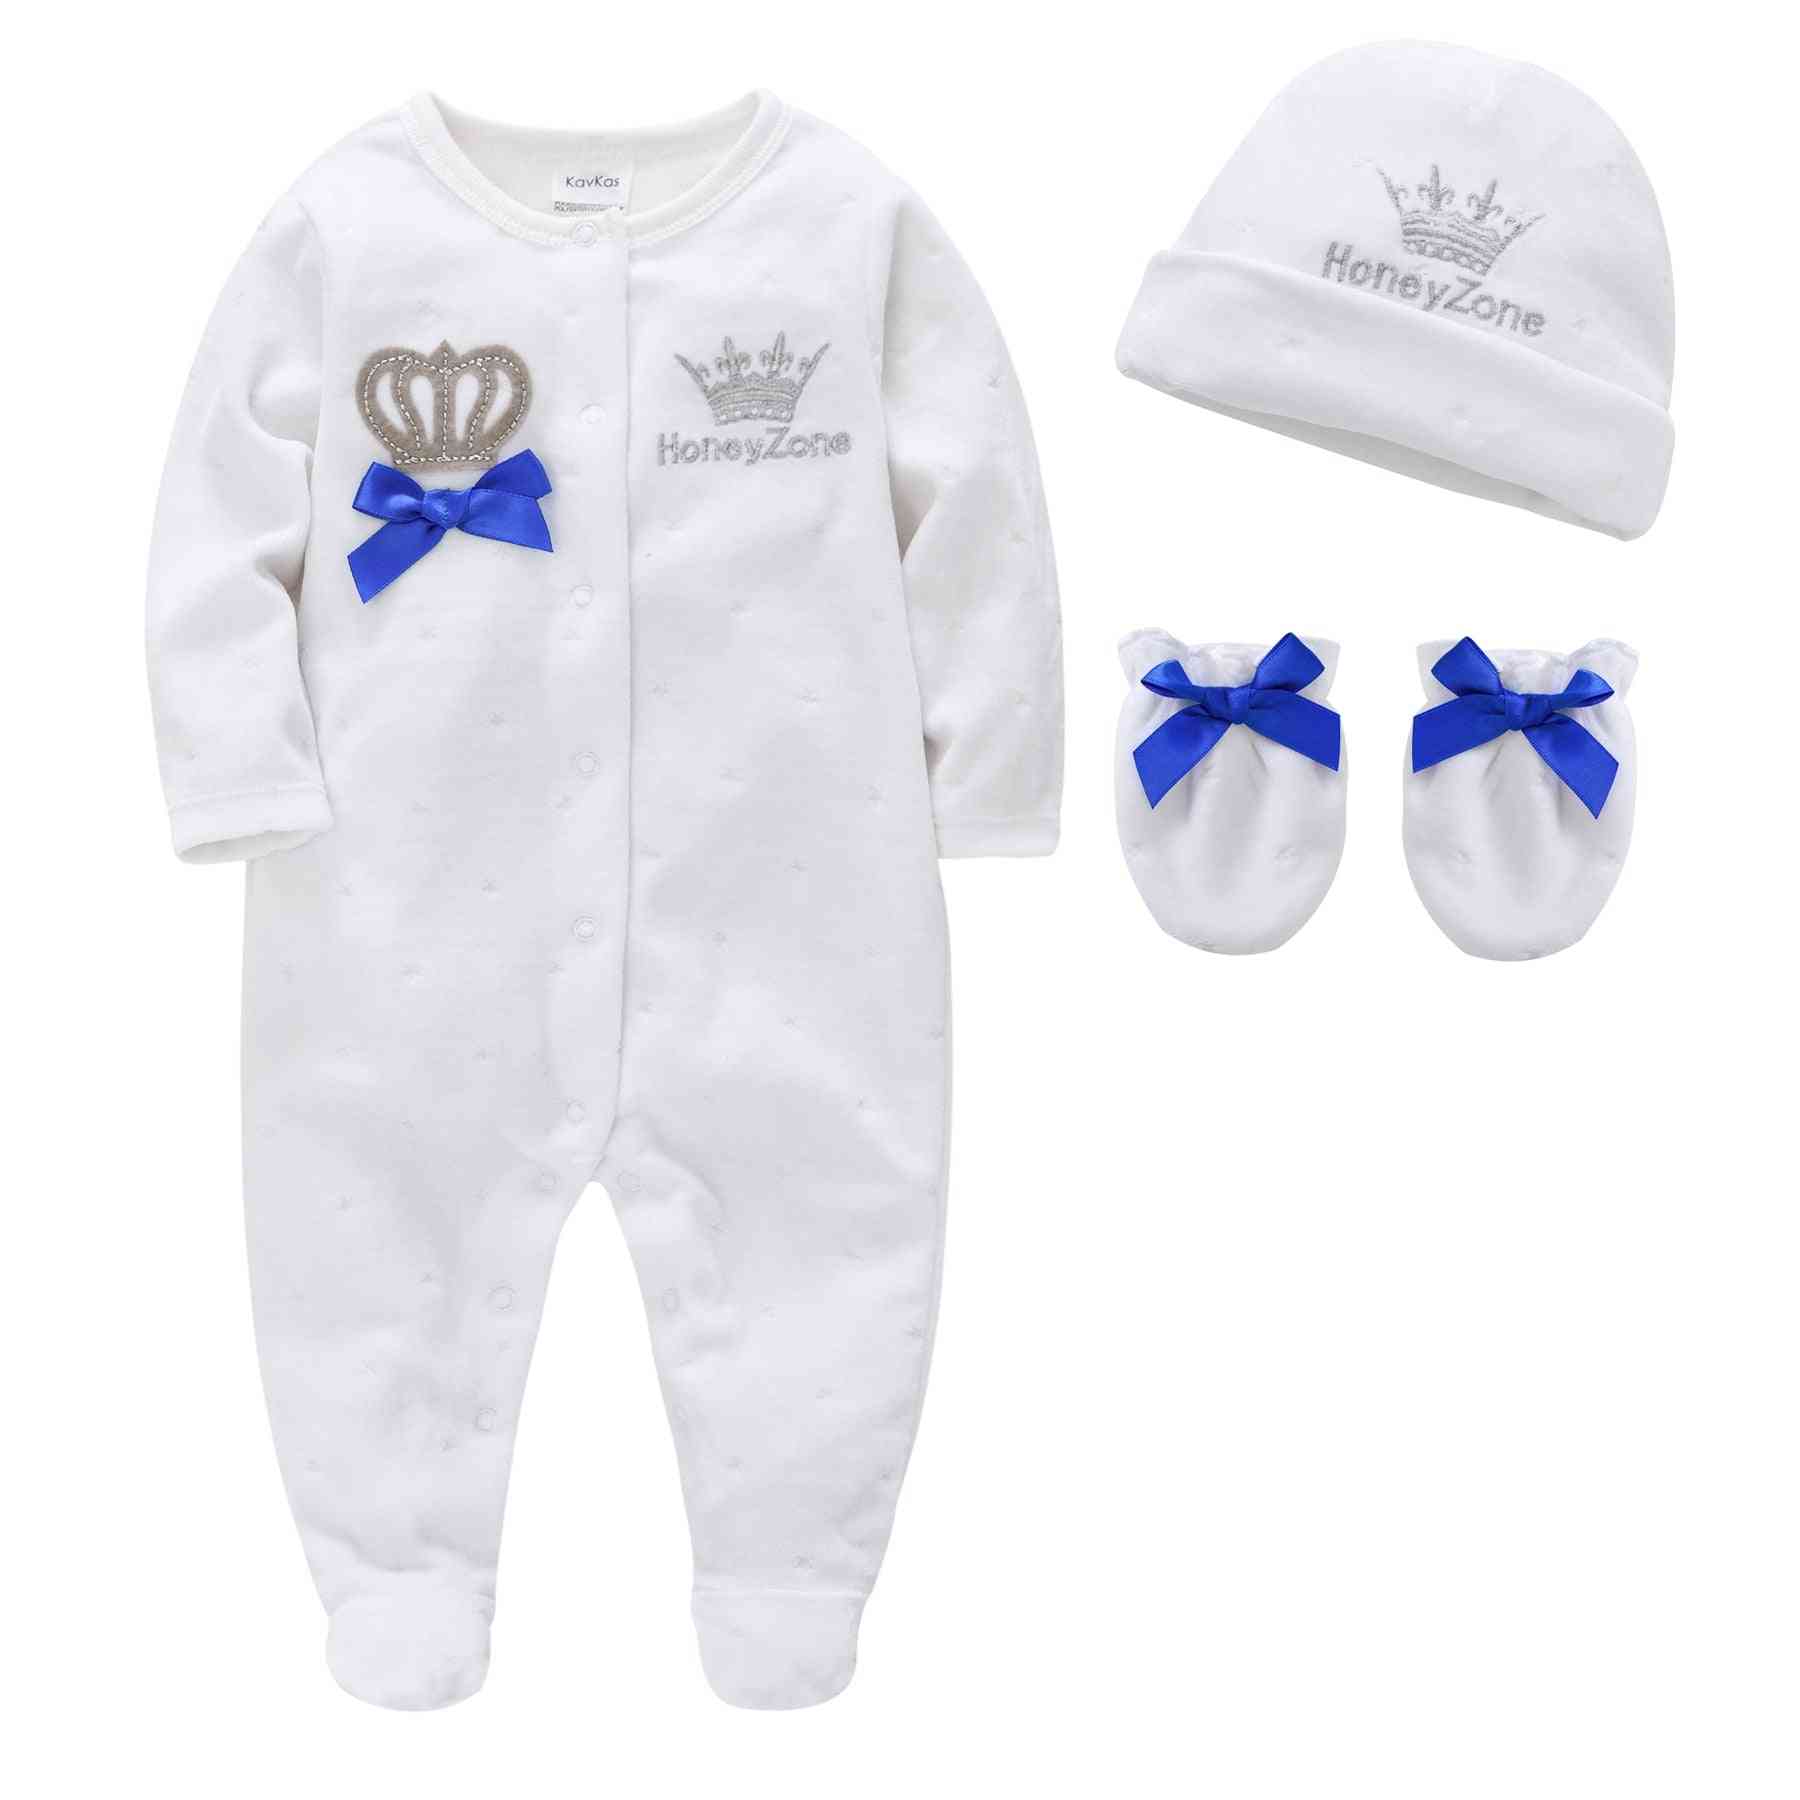 Boy Pijamas Fille With Hats Gloves, Cotton Breathable Soft Rope Newborn Sleepers